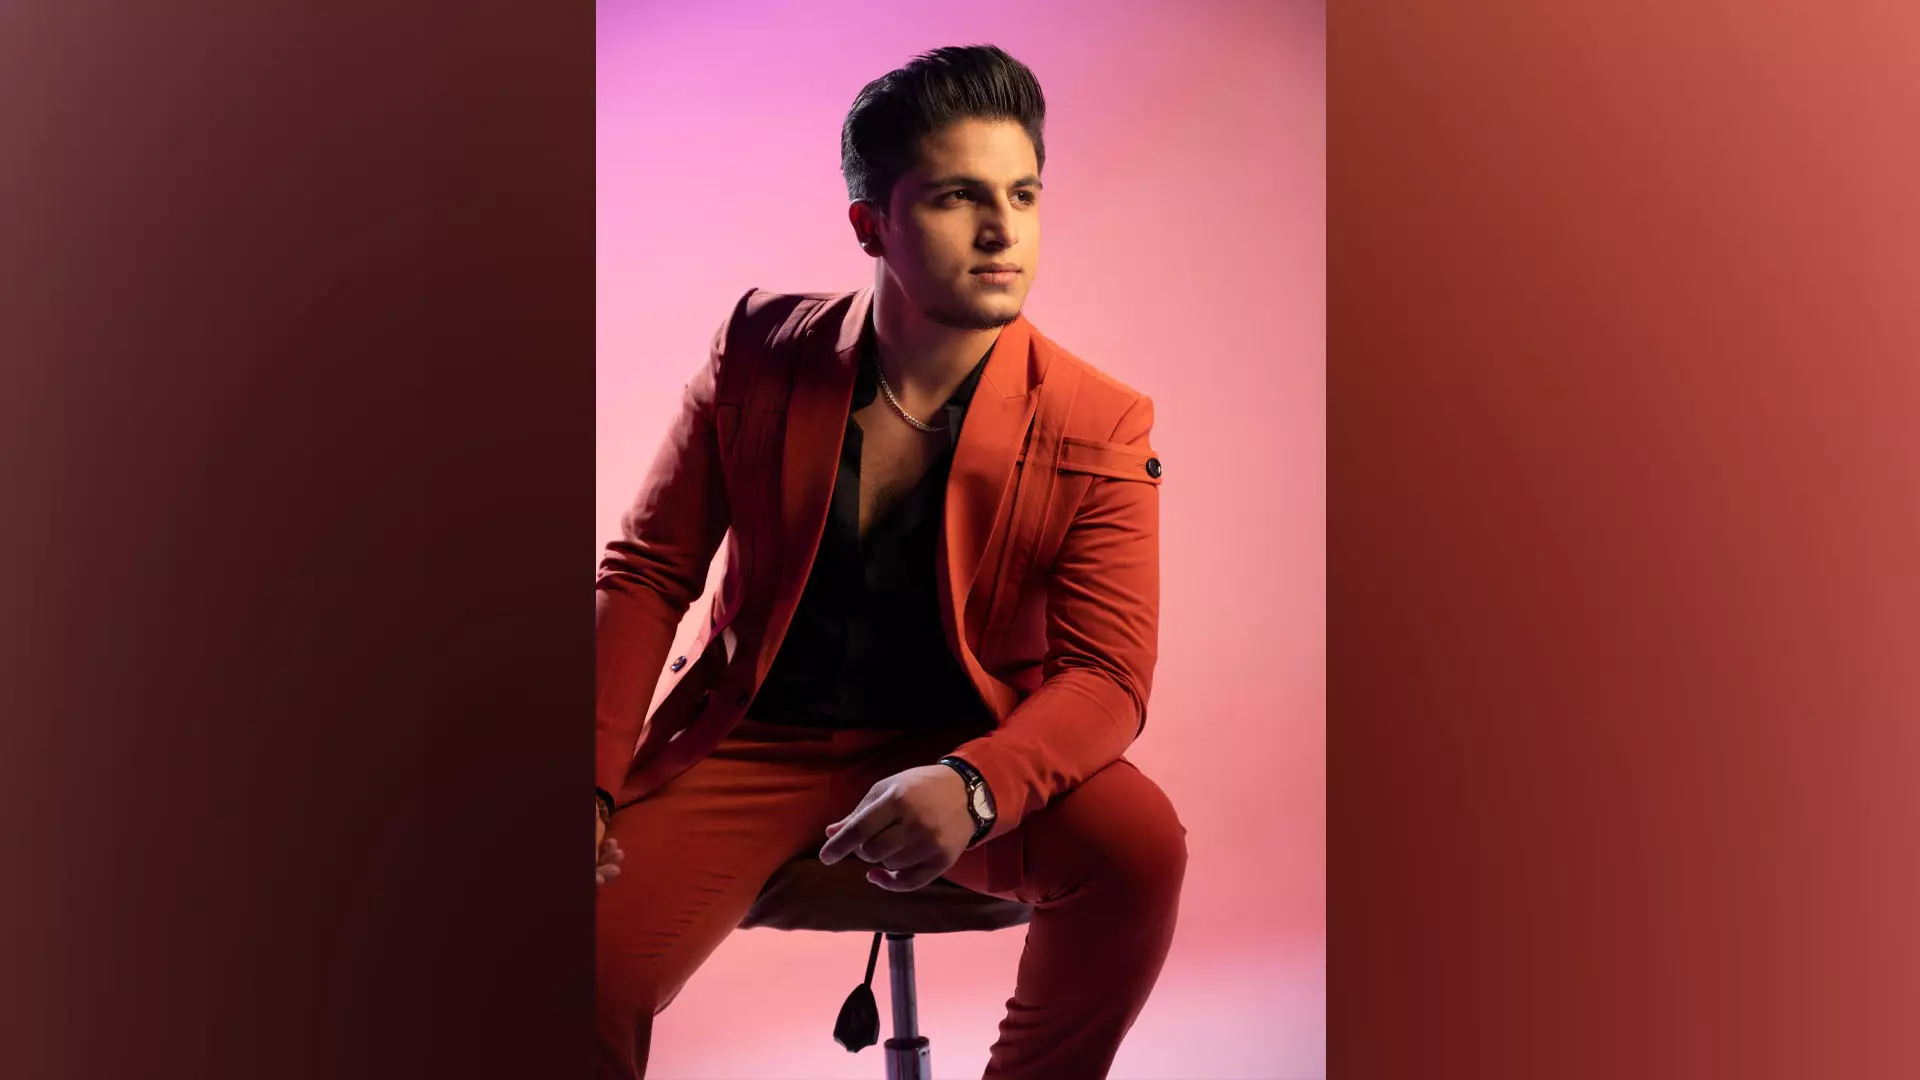 Sameer Walizada’s journey as a professional playback singer and live performer traces back to high school, where his passion for singing ignited a flame. 